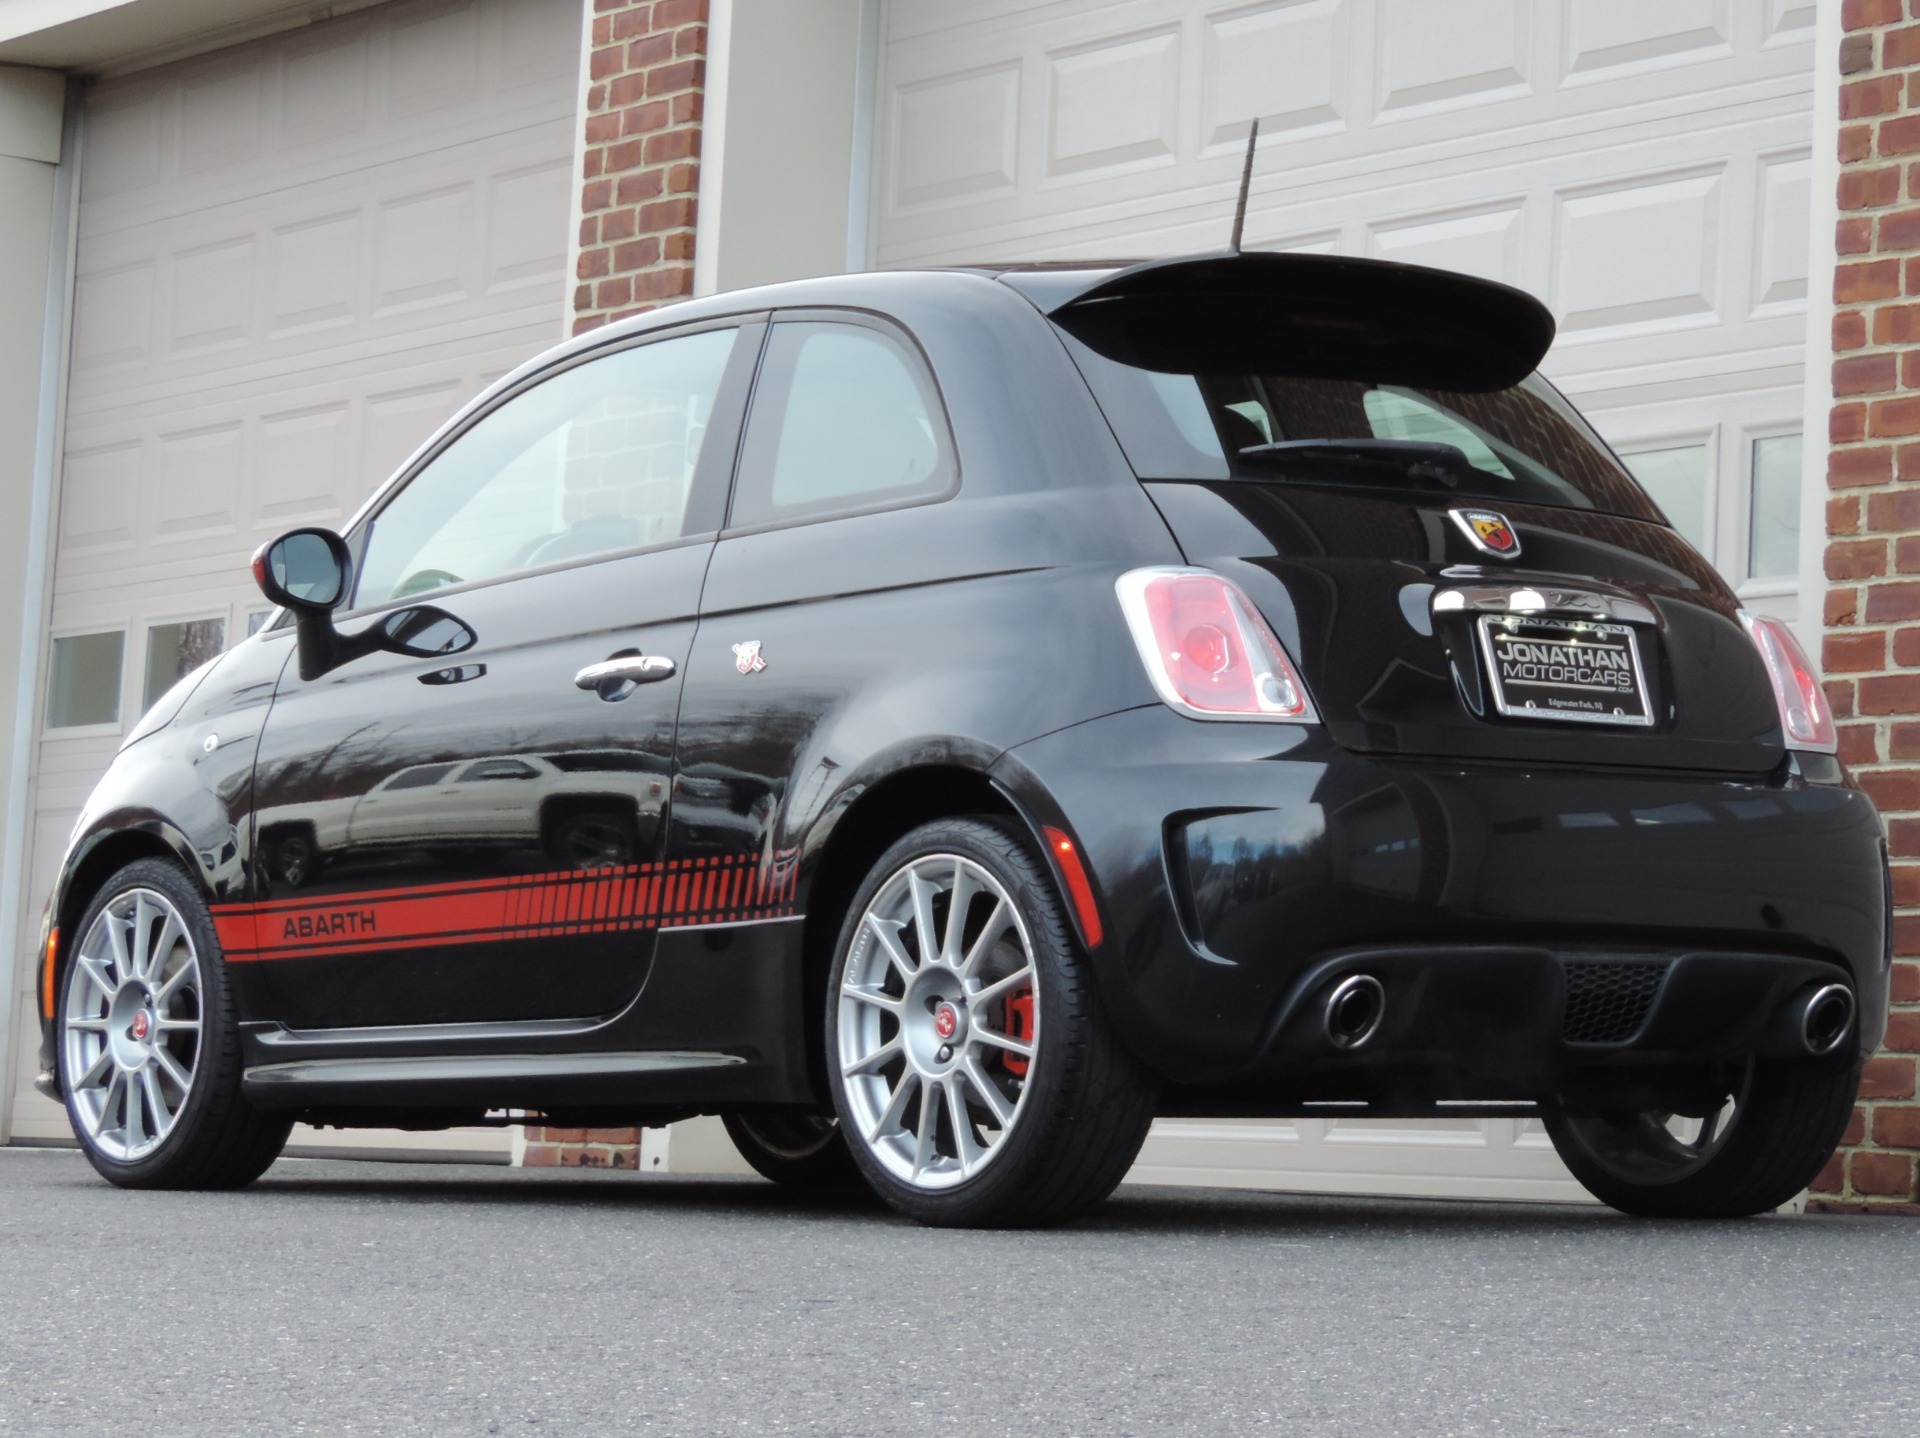 2013 Fiat Abarth 060 2013 FIAT 500 Reviews Research